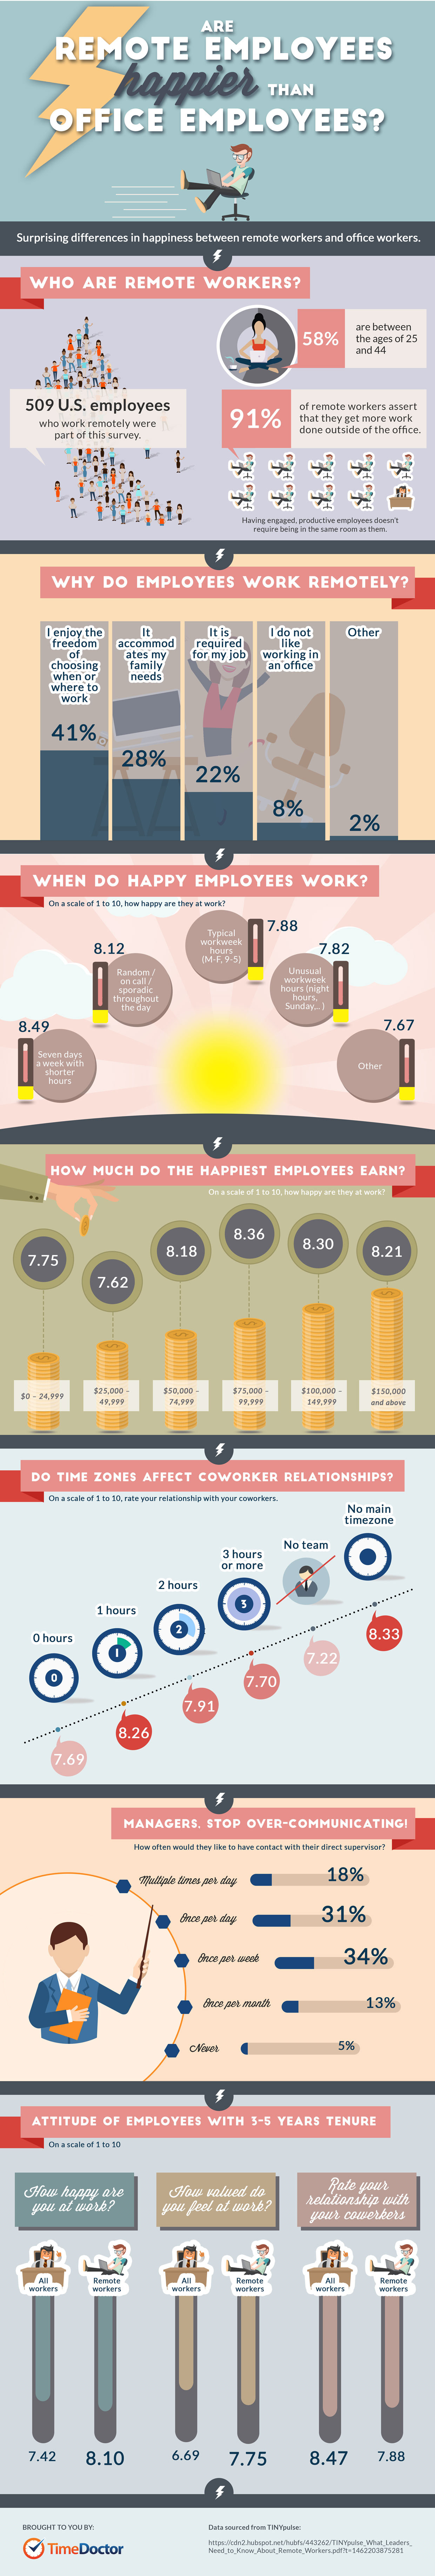 remote workers infographic